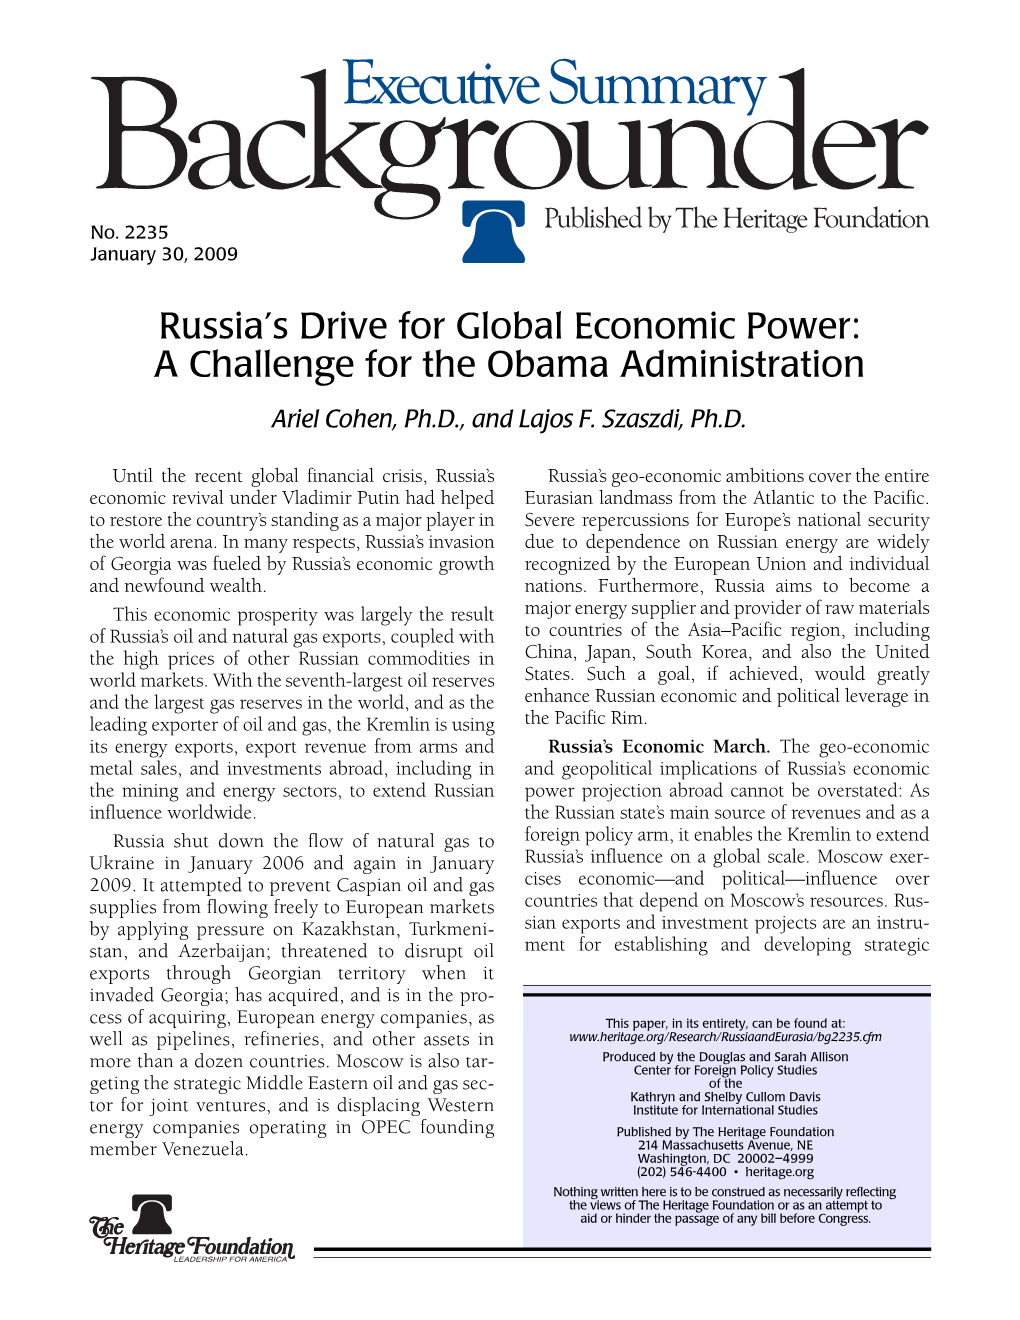 Russia's Drive for Global Economic Power: a Challenge for the Obama